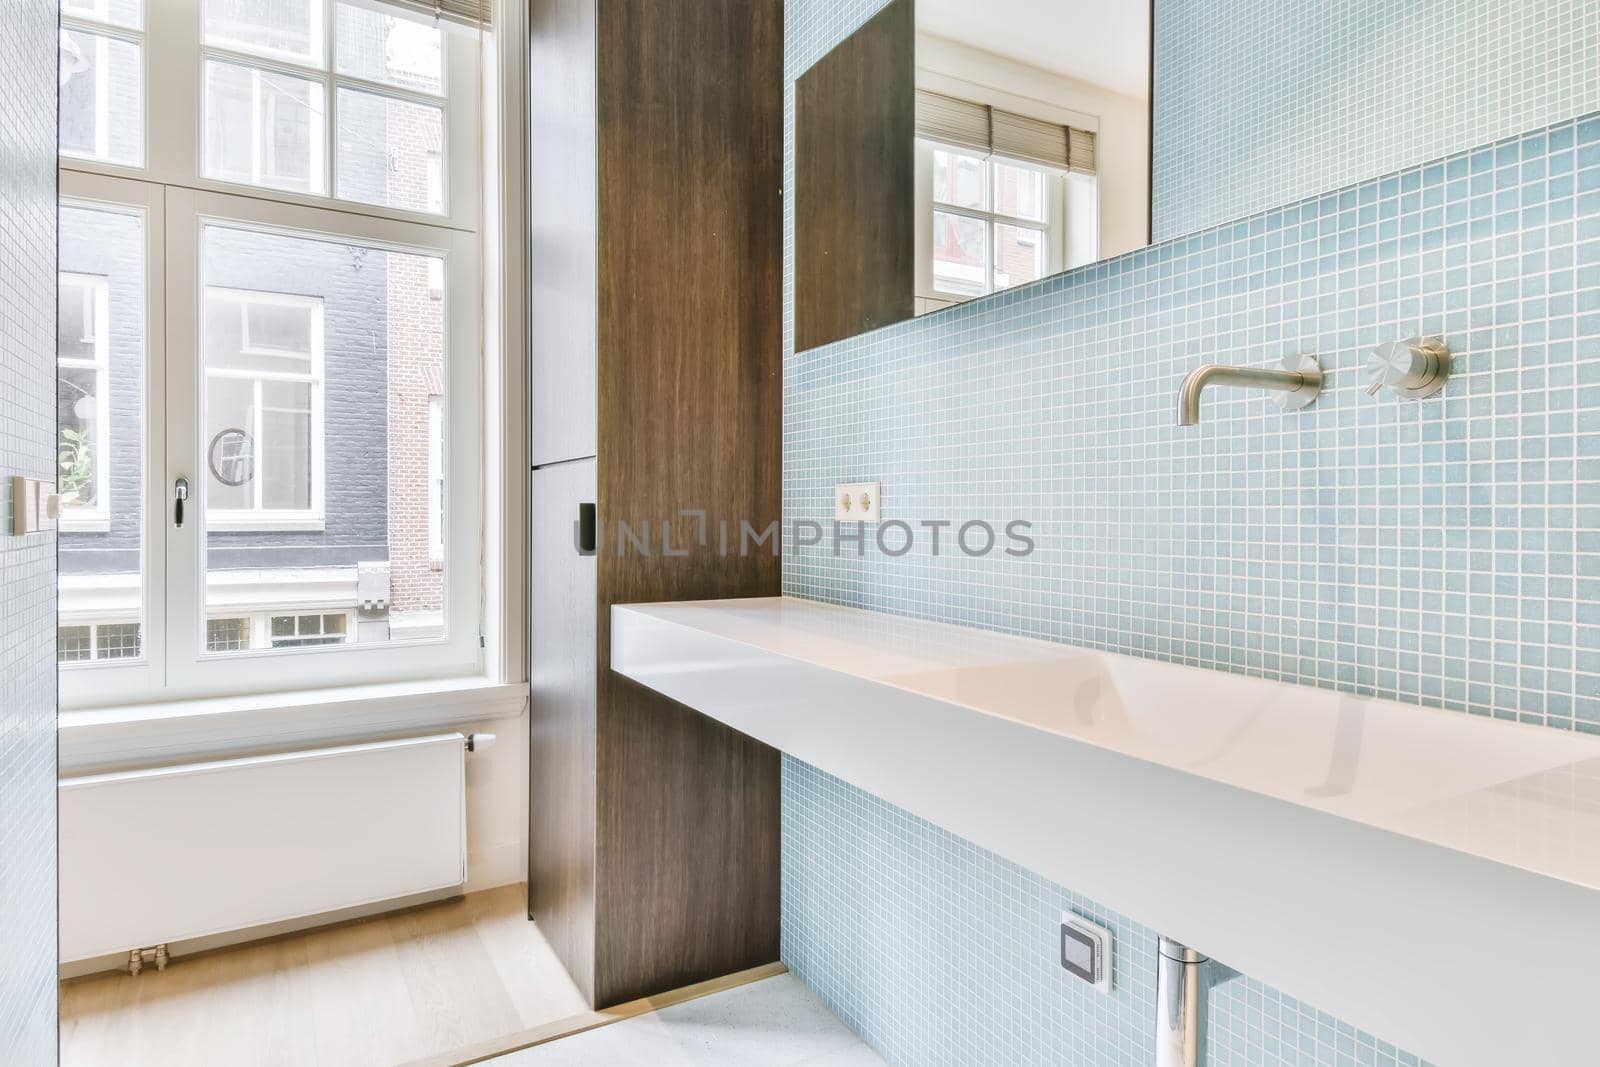 Bathroom with a long sink and mirror